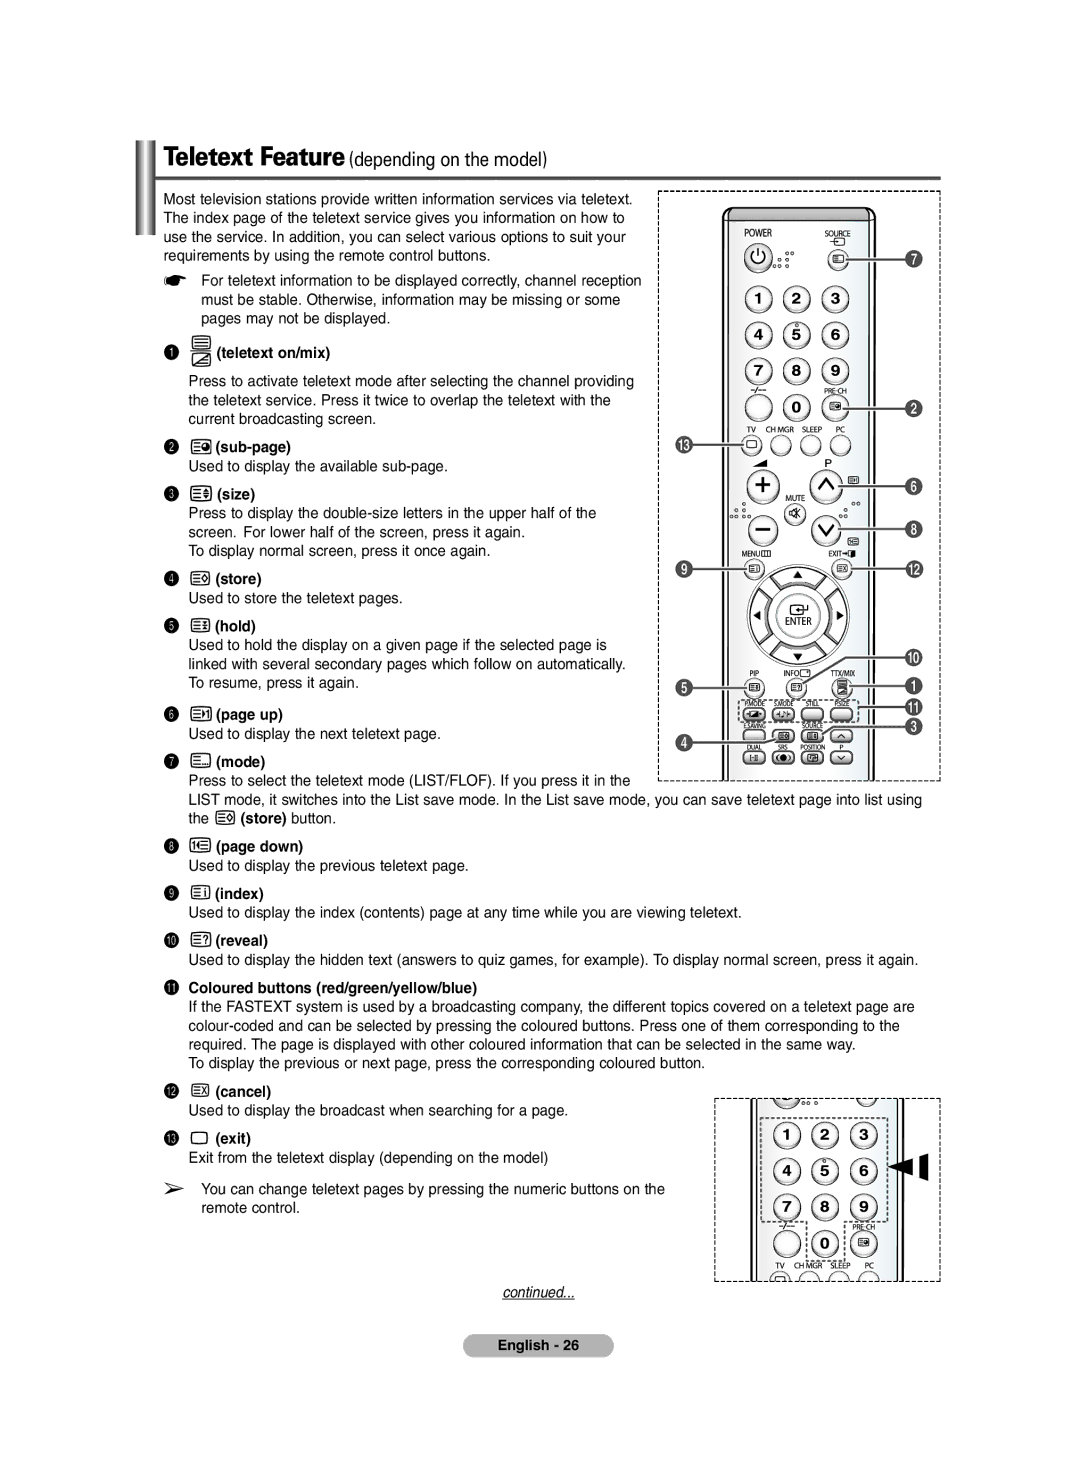 Samsung PS-42E7S, PS-42E7H manual Teletext on/mix, ´ sub-page, Size, ¨ store, Hold, Down, ’ index, ˝ reveal,  cancel, Exit 